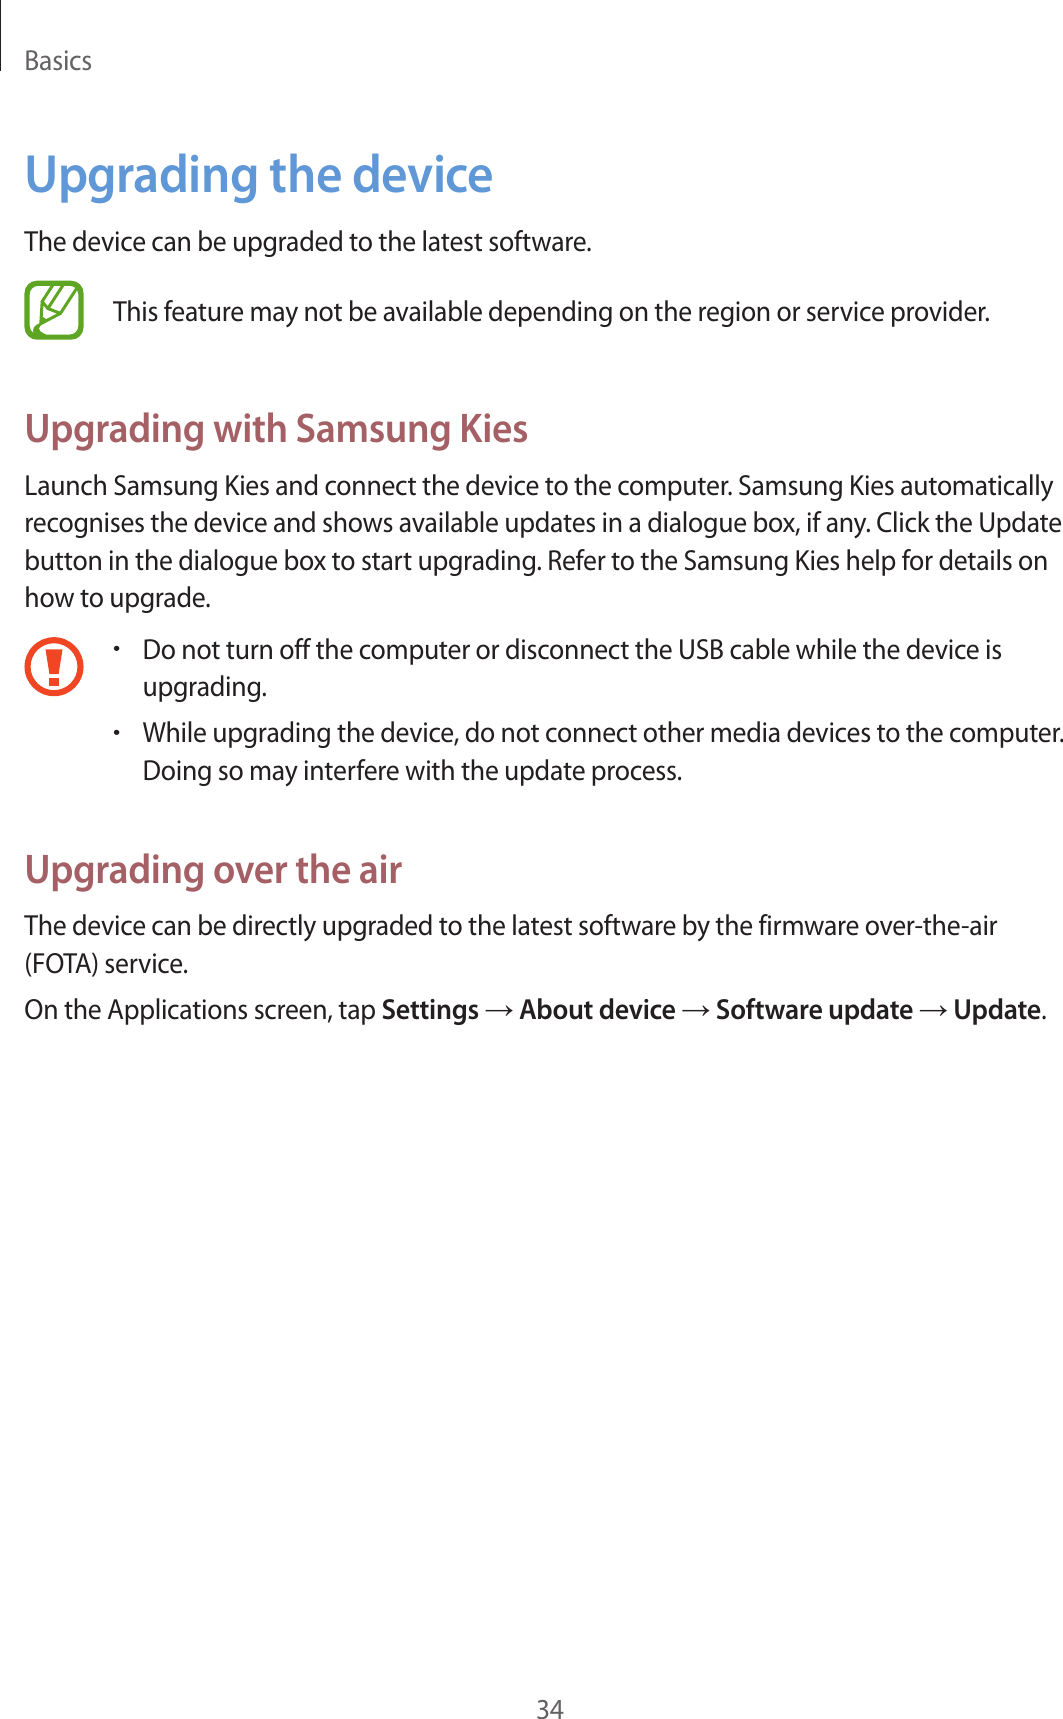 Basics34Upgrading the deviceThe device can be upgraded to the latest software.This feature may not be available depending on the region or service provider.Upgrading with Samsung KiesLaunch Samsung Kies and connect the device to the computer. Samsung Kies automatically recognises the device and shows available updates in a dialogue box, if any. Click the Update button in the dialogue box to start upgrading. Refer to the Samsung Kies help for details on how to upgrade.•Do not turn off the computer or disconnect the USB cable while the device is upgrading.•While upgrading the device, do not connect other media devices to the computer. Doing so may interfere with the update process.Upgrading over the airThe device can be directly upgraded to the latest software by the firmware over-the-air (FOTA) service.On the Applications screen, tap Settings → About device → Software update → Update.